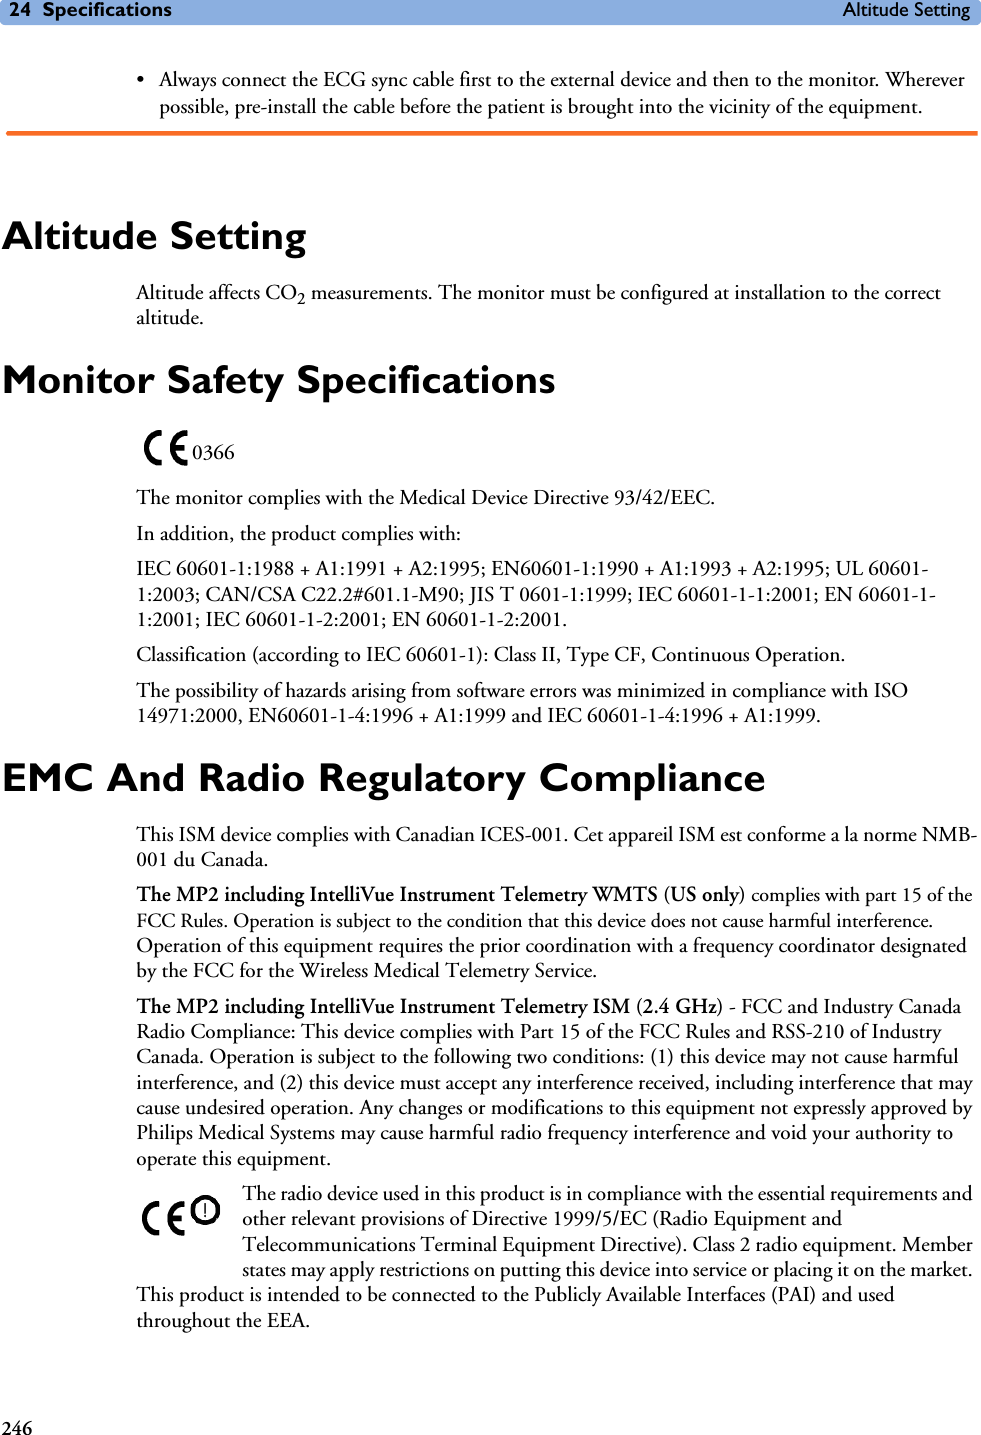 24 Specifications Altitude Setting246• Always connect the ECG sync cable first to the external device and then to the monitor. Wherever possible, pre-install the cable before the patient is brought into the vicinity of the equipment.Altitude SettingAltitude affects CO2 measurements. The monitor must be configured at installation to the correct altitude. Monitor Safety SpecificationsThe monitor complies with the Medical Device Directive 93/42/EEC.In addition, the product complies with:IEC 60601-1:1988 + A1:1991 + A2:1995; EN60601-1:1990 + A1:1993 + A2:1995; UL 60601-1:2003; CAN/CSA C22.2#601.1-M90; JIS T 0601-1:1999; IEC 60601-1-1:2001; EN 60601-1-1:2001; IEC 60601-1-2:2001; EN 60601-1-2:2001.Classification (according to IEC 60601-1): Class II, Type CF, Continuous Operation.The possibility of hazards arising from software errors was minimized in compliance with ISO 14971:2000, EN60601-1-4:1996 + A1:1999 and IEC 60601-1-4:1996 + A1:1999.EMC And Radio Regulatory ComplianceThis ISM device complies with Canadian ICES-001. Cet appareil ISM est conforme a la norme NMB-001 du Canada.The MP2 including IntelliVue Instrument Telemetry WMTS (US only) complies with part 15 of the FCC Rules. Operation is subject to the condition that this device does not cause harmful interference. Operation of this equipment requires the prior coordination with a frequency coordinator designated by the FCC for the Wireless Medical Telemetry Service.The MP2 including IntelliVue Instrument Telemetry ISM (2.4 GHz) - FCC and Industry Canada Radio Compliance: This device complies with Part 15 of the FCC Rules and RSS-210 of Industry Canada. Operation is subject to the following two conditions: (1) this device may not cause harmful interference, and (2) this device must accept any interference received, including interference that may cause undesired operation. Any changes or modifications to this equipment not expressly approved by Philips Medical Systems may cause harmful radio frequency interference and void your authority to operate this equipment.The radio device used in this product is in compliance with the essential requirements and other relevant provisions of Directive 1999/5/EC (Radio Equipment and Telecommunications Terminal Equipment Directive). Class 2 radio equipment. Member states may apply restrictions on putting this device into service or placing it on the market. This product is intended to be connected to the Publicly Available Interfaces (PAI) and used throughout the EEA.0366